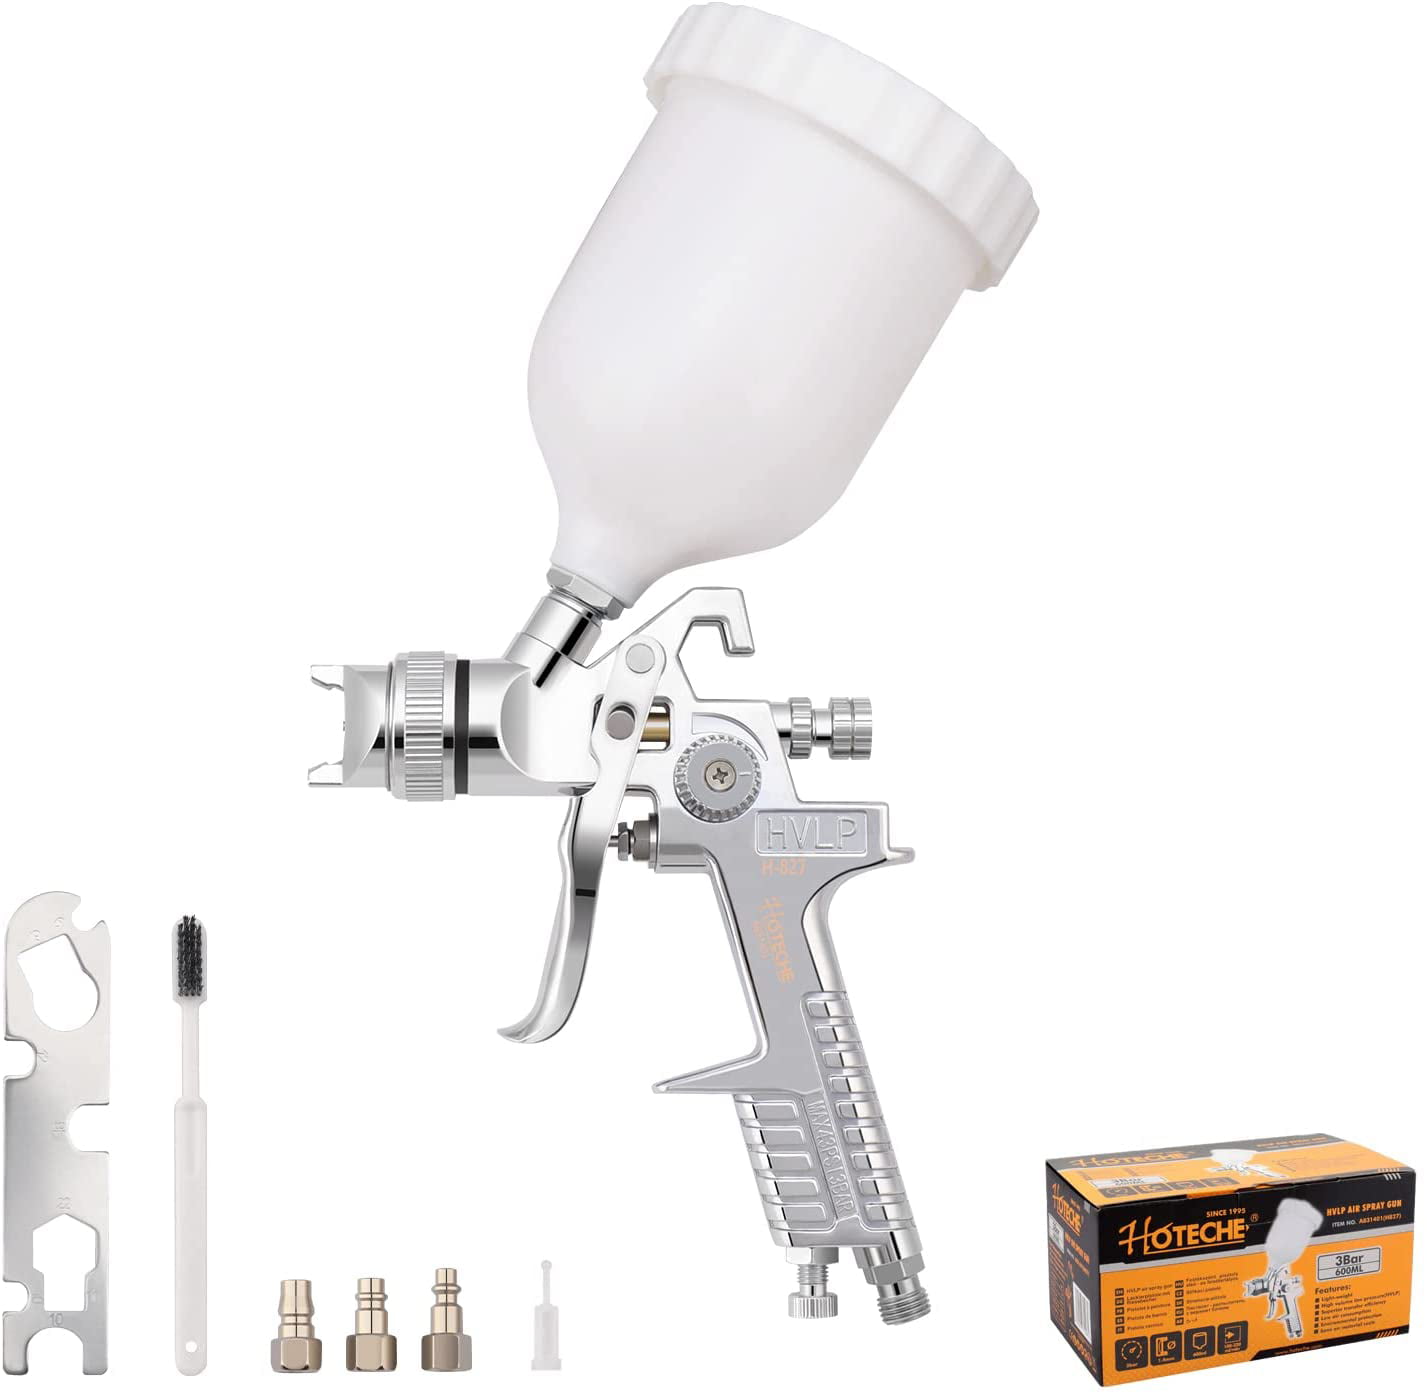 LVLP Gravity Feed Air Spray Paint Gun With 1.4mm Nozzle 600ml Cup Capacity 